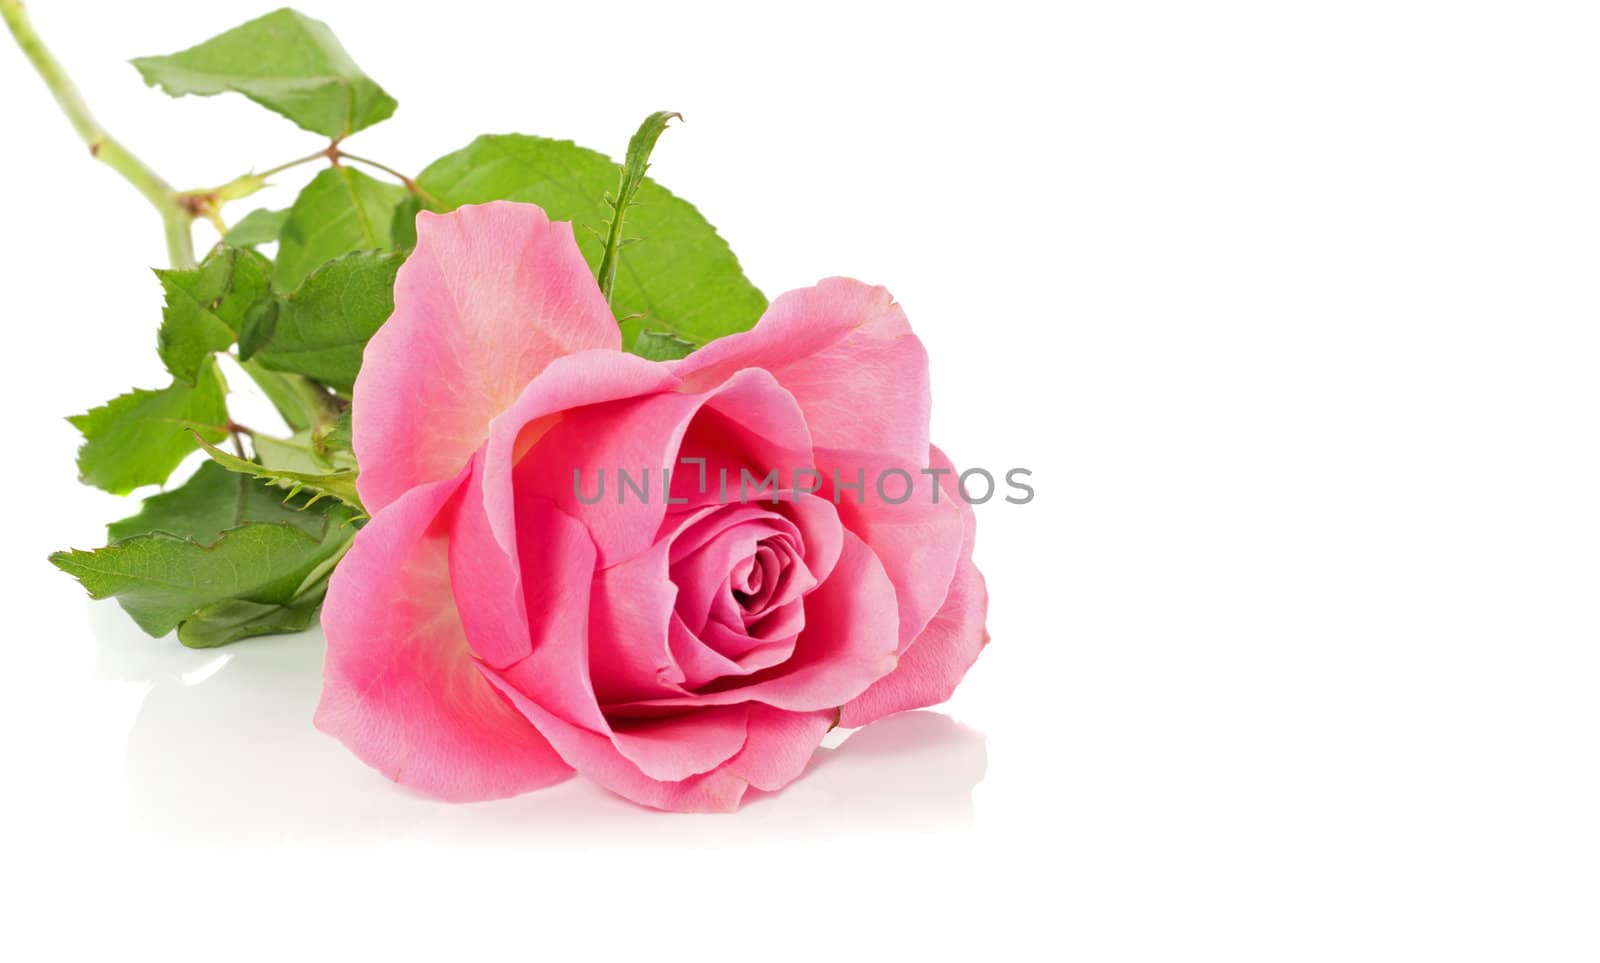 pink rose and green leaves isolated on white